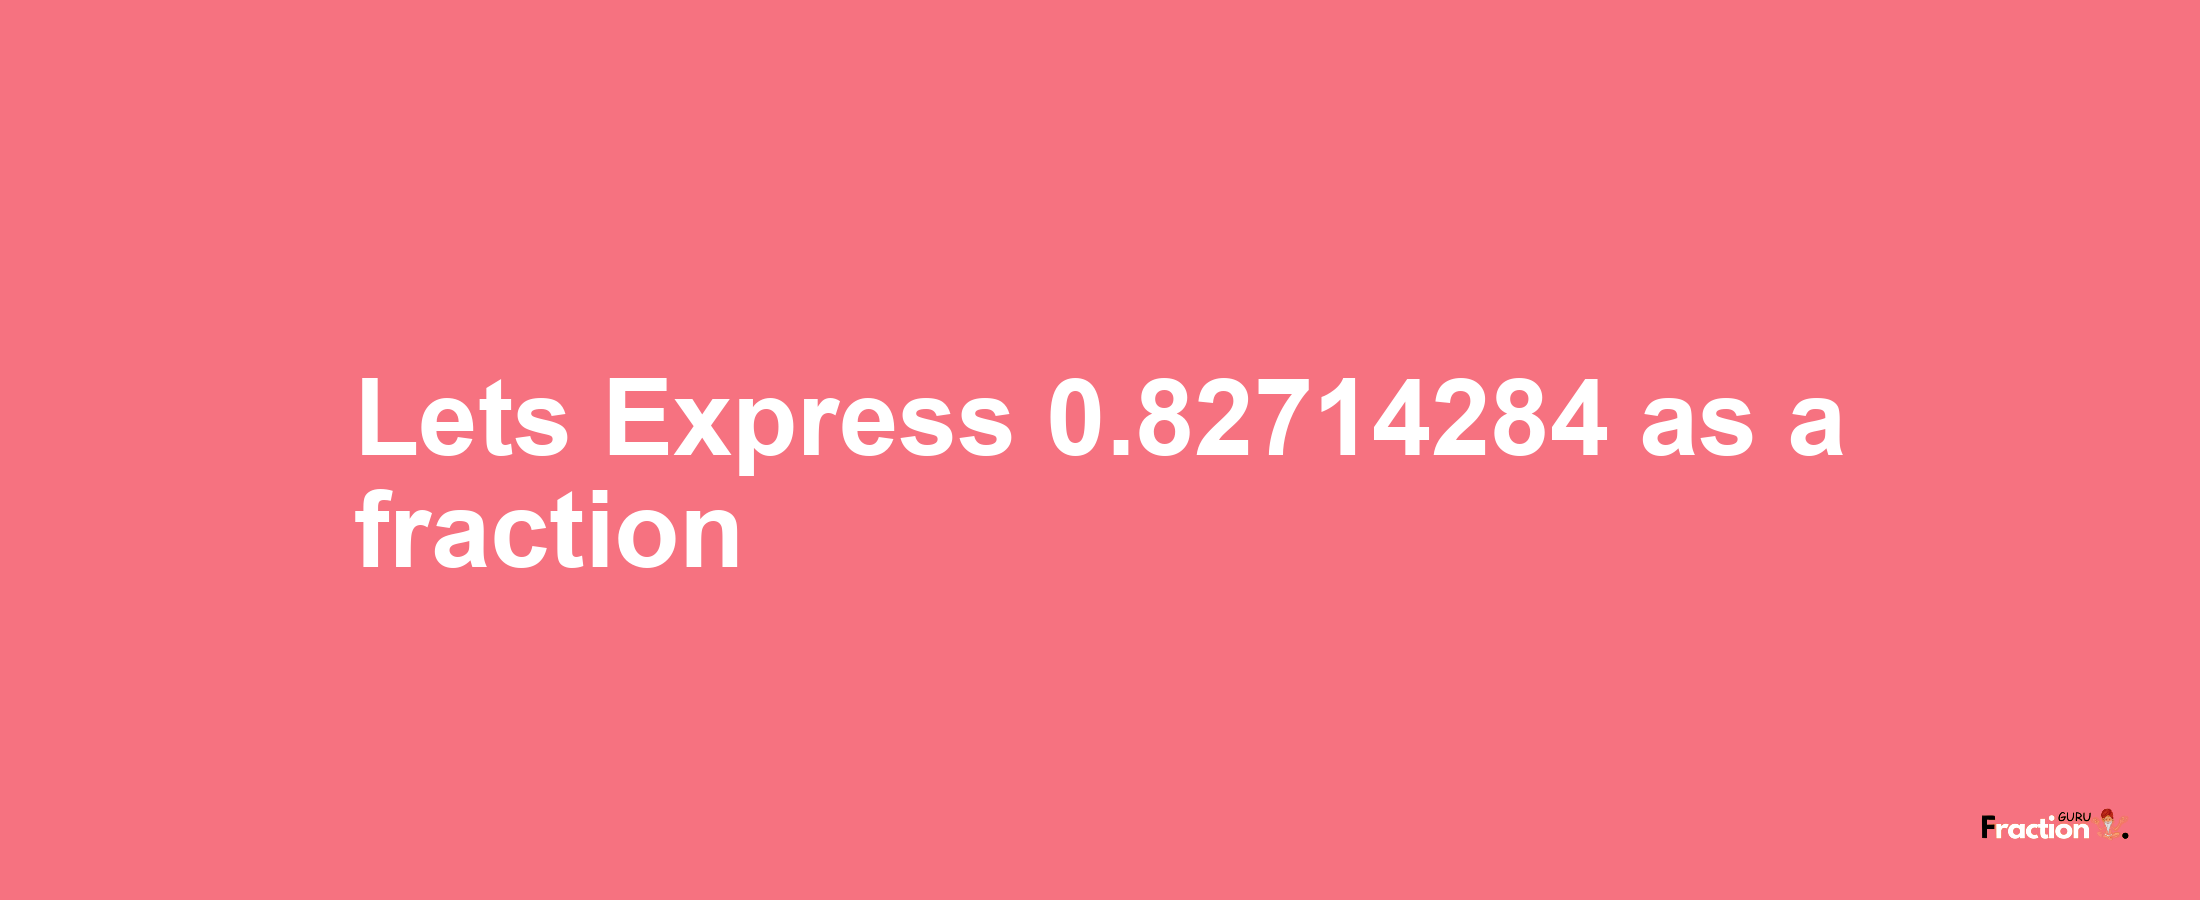 Lets Express 0.82714284 as afraction